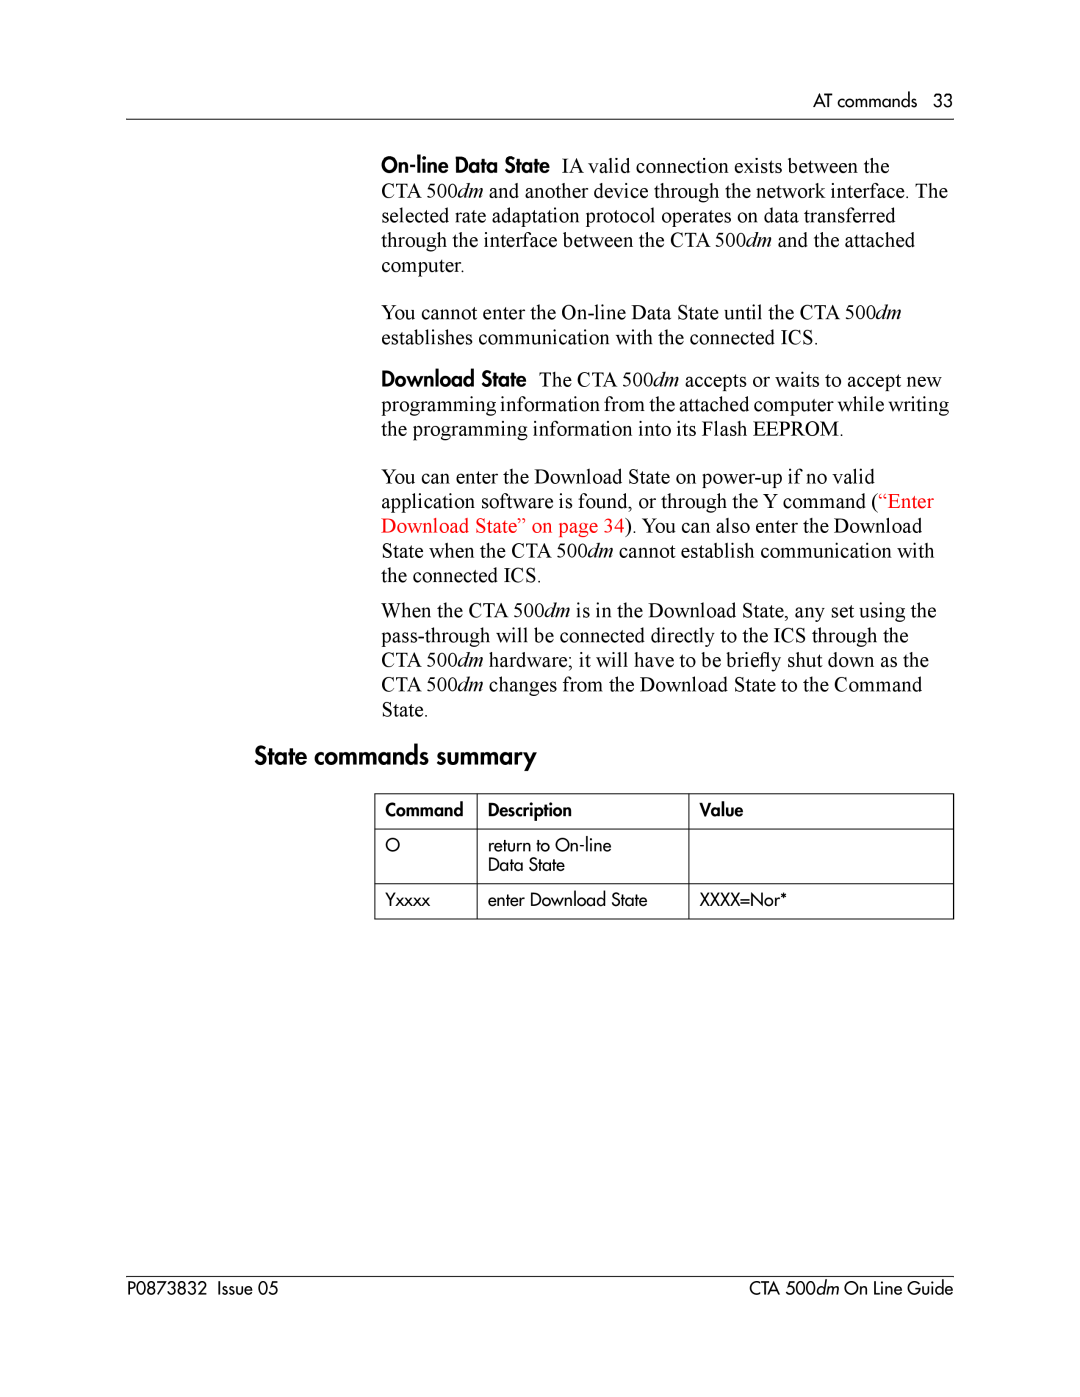 Nortel Networks CTA 500dm manual State commands summary 